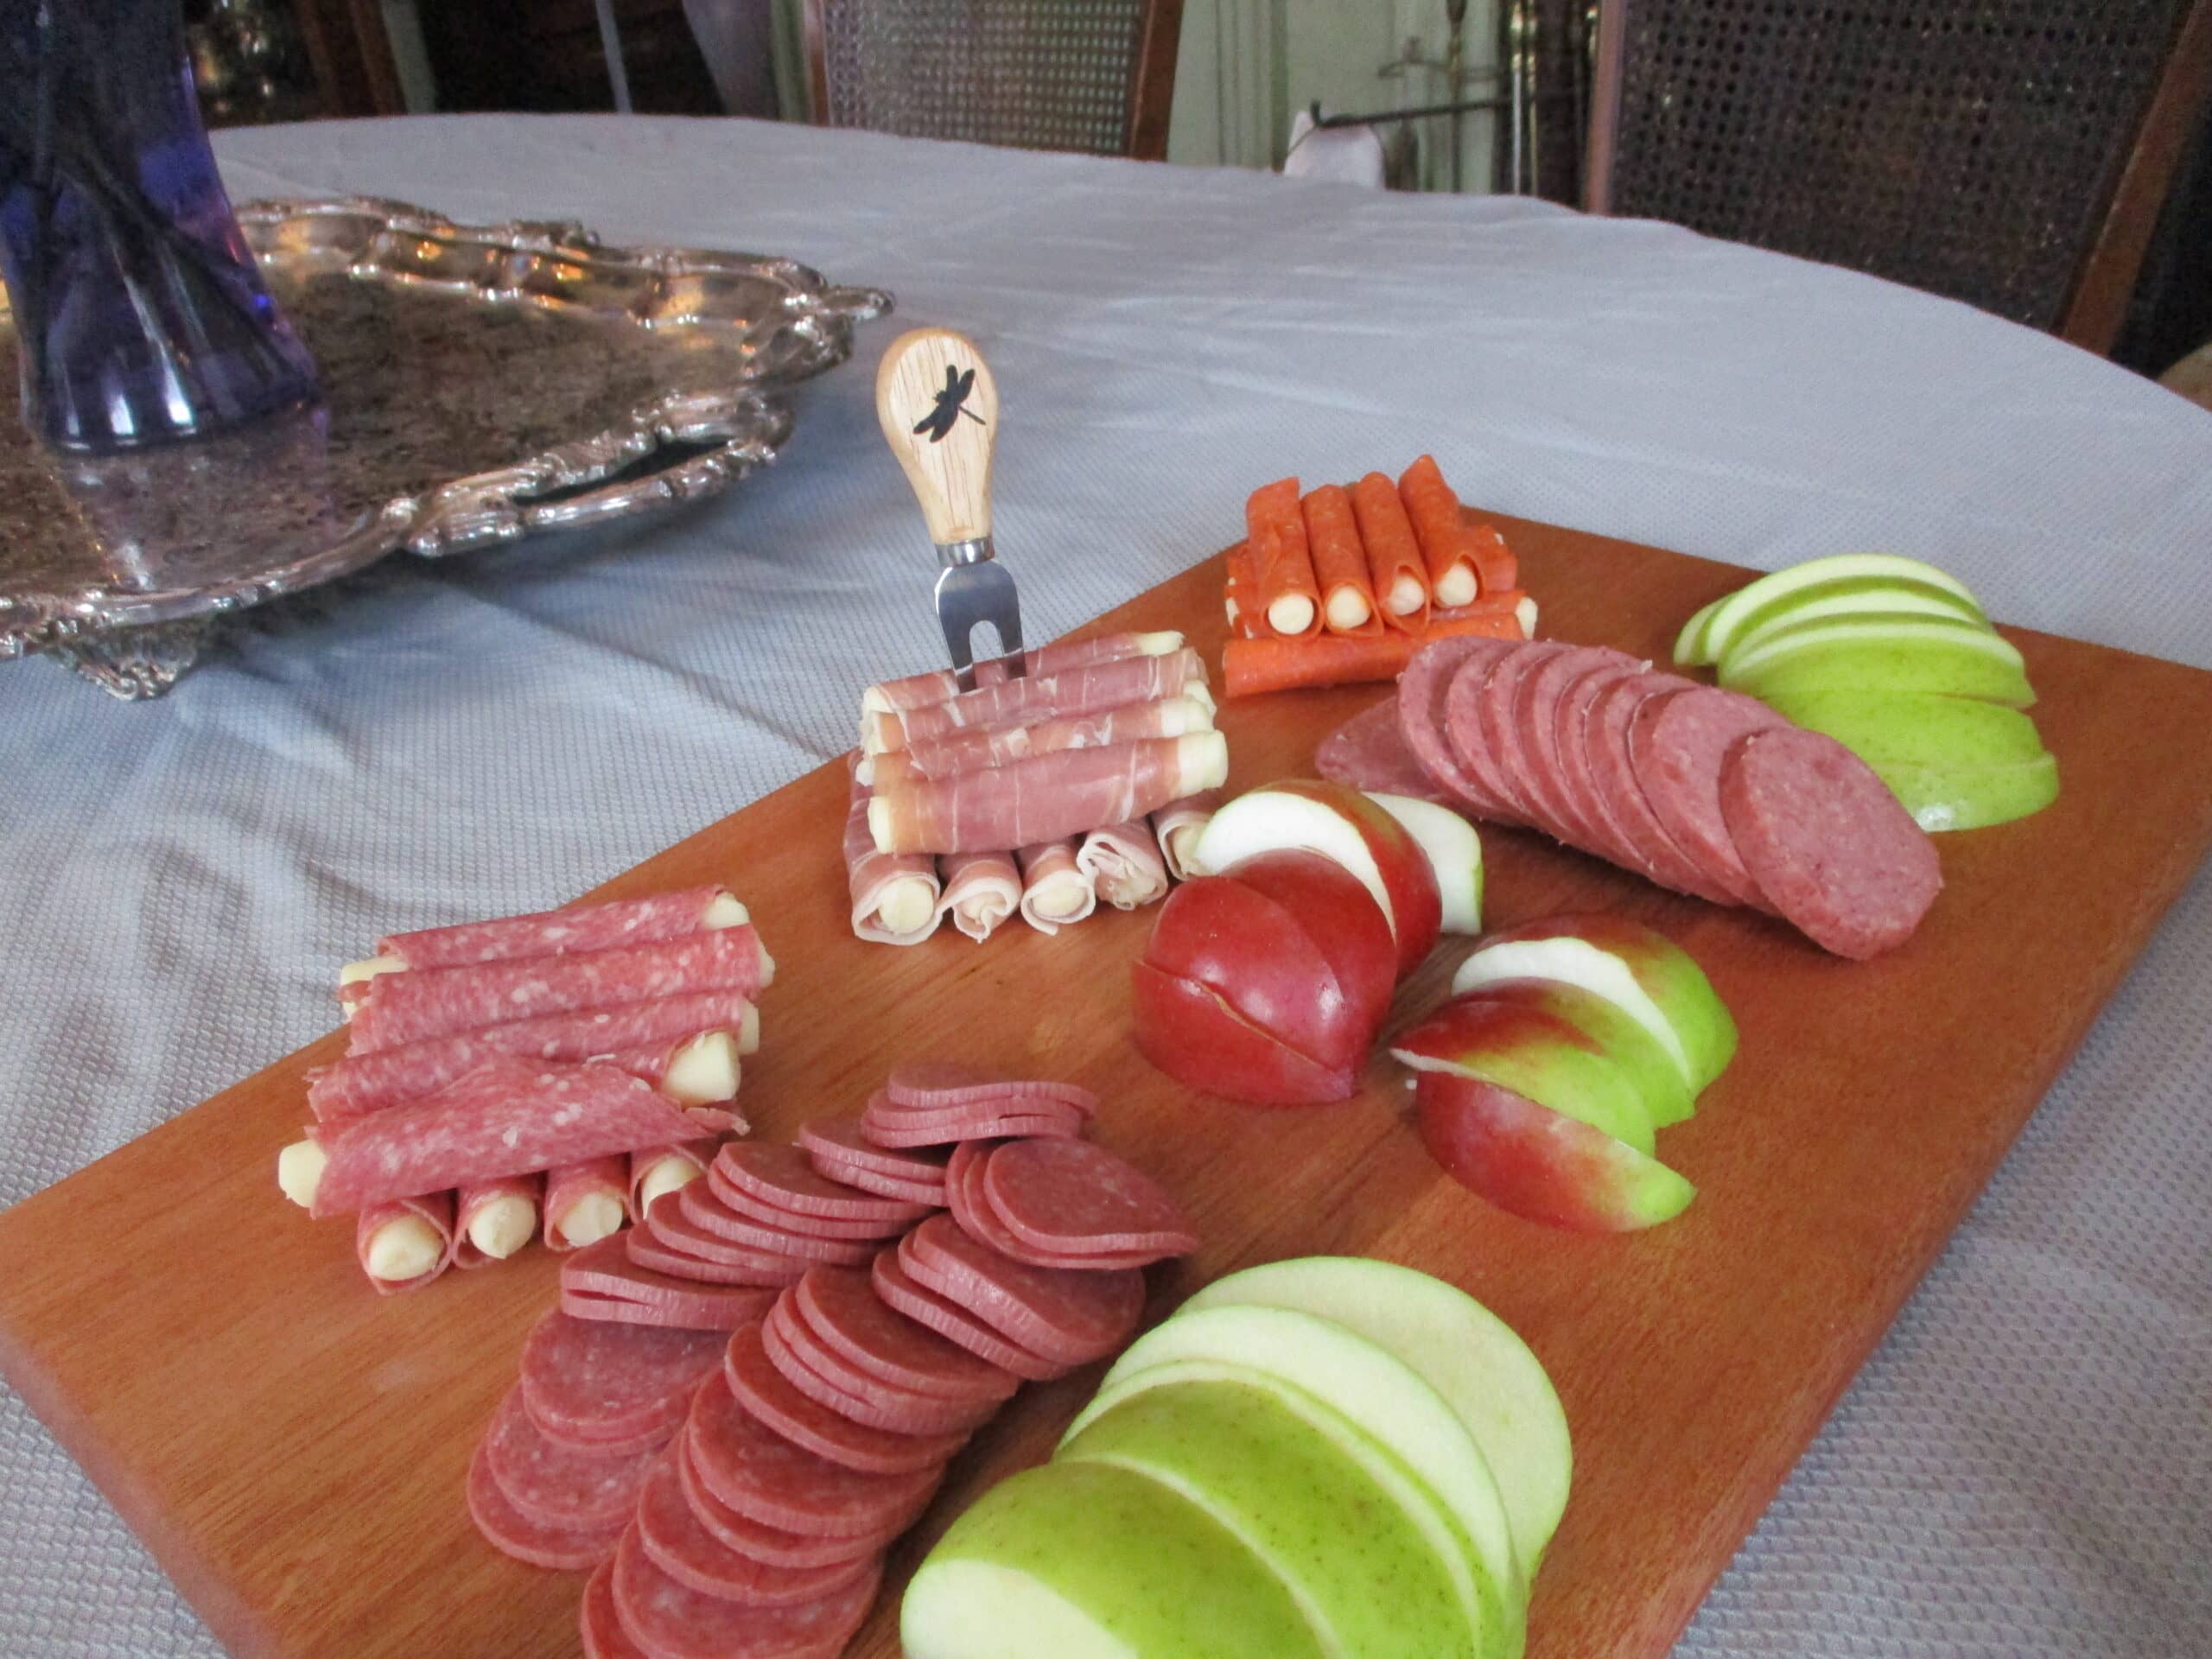 Custom Mahogany cutting board/charcuterie board as a housewarming gift pictured with fruit, cheese, and cured meats.